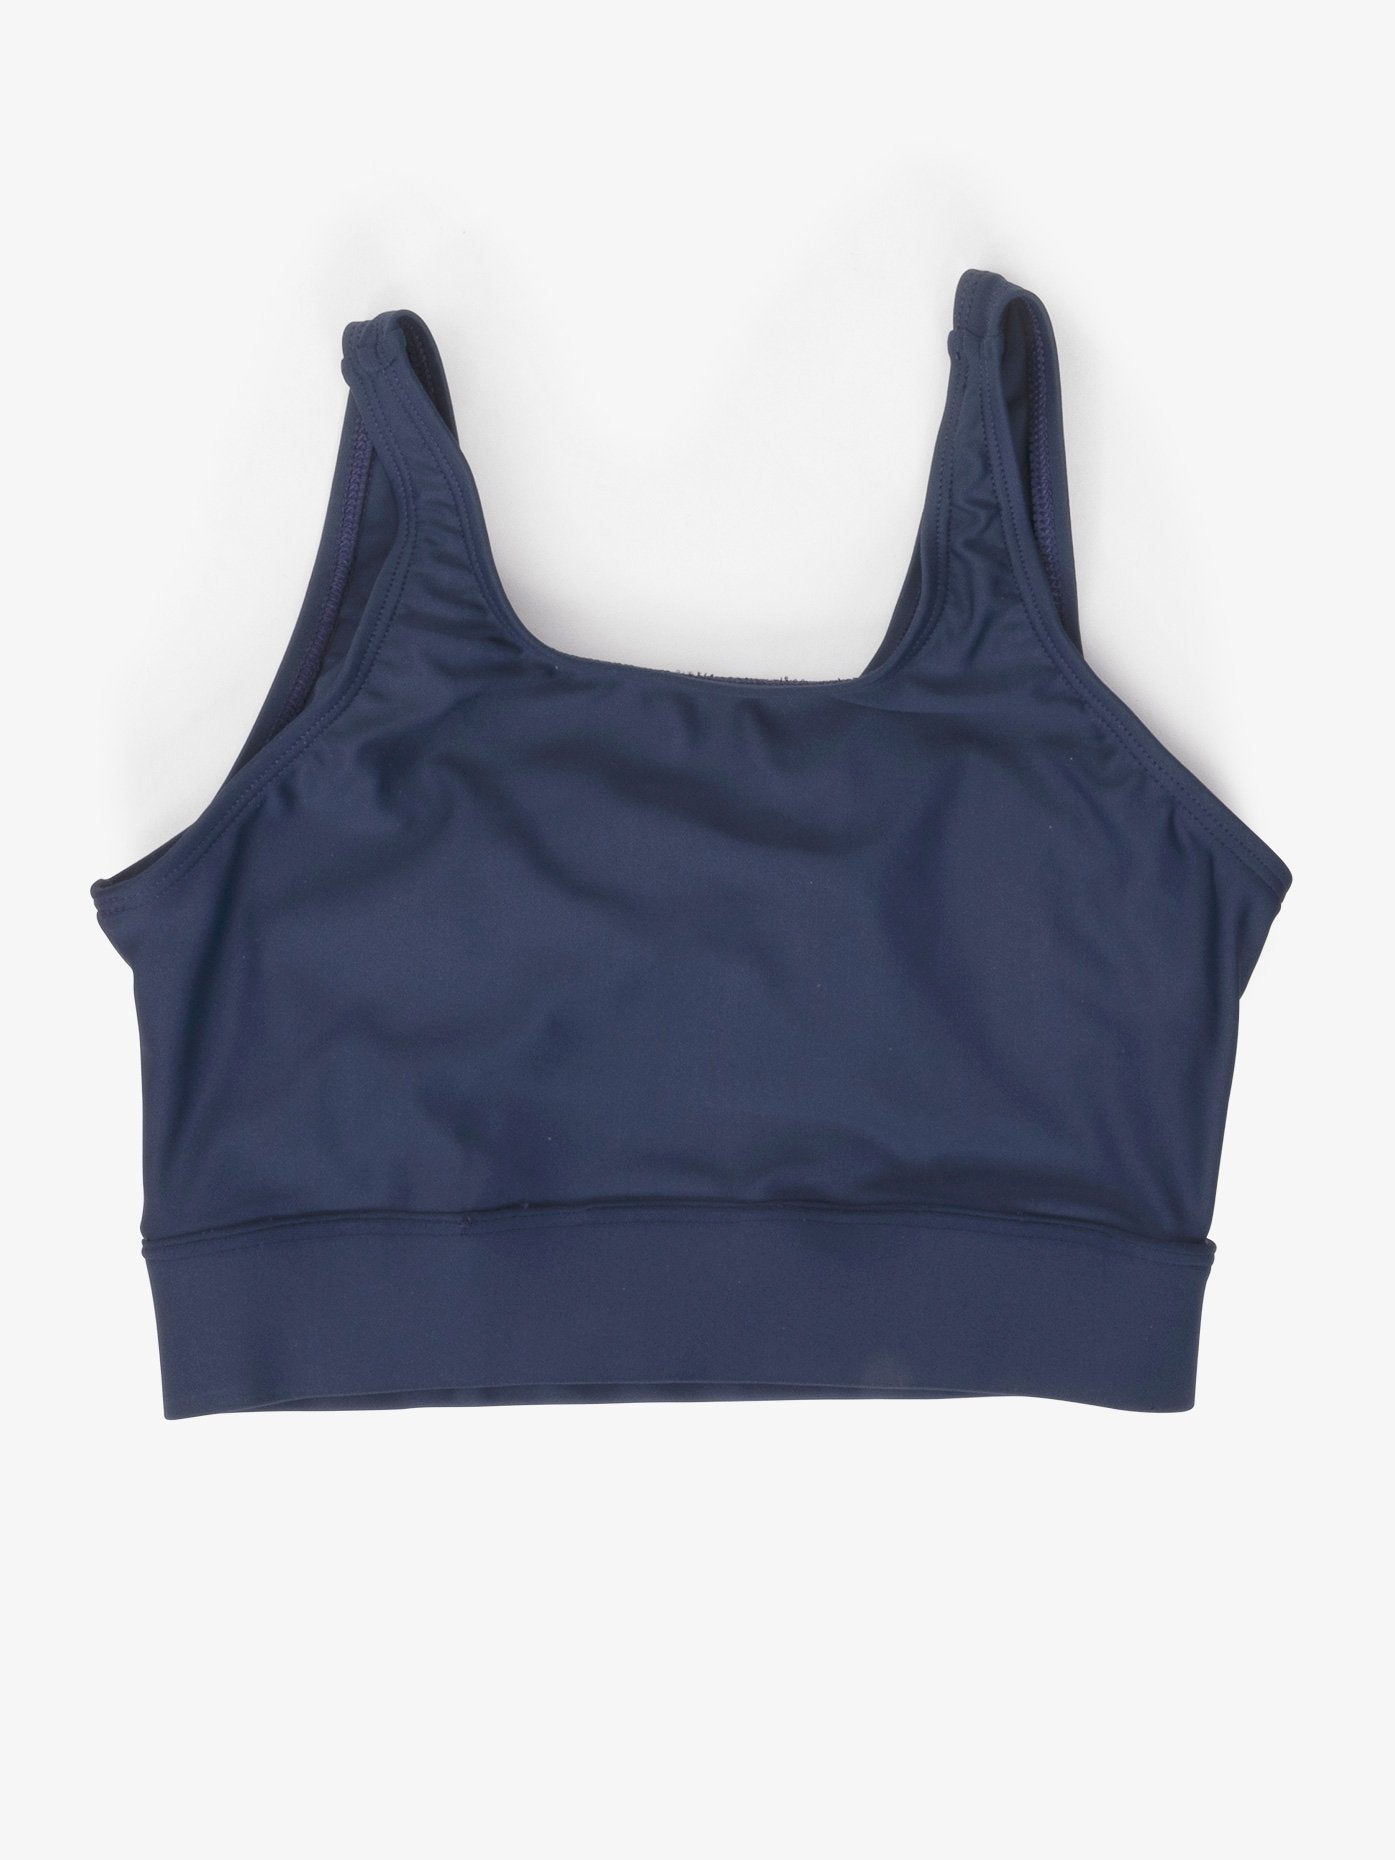 Girl's pinched back grey bra top